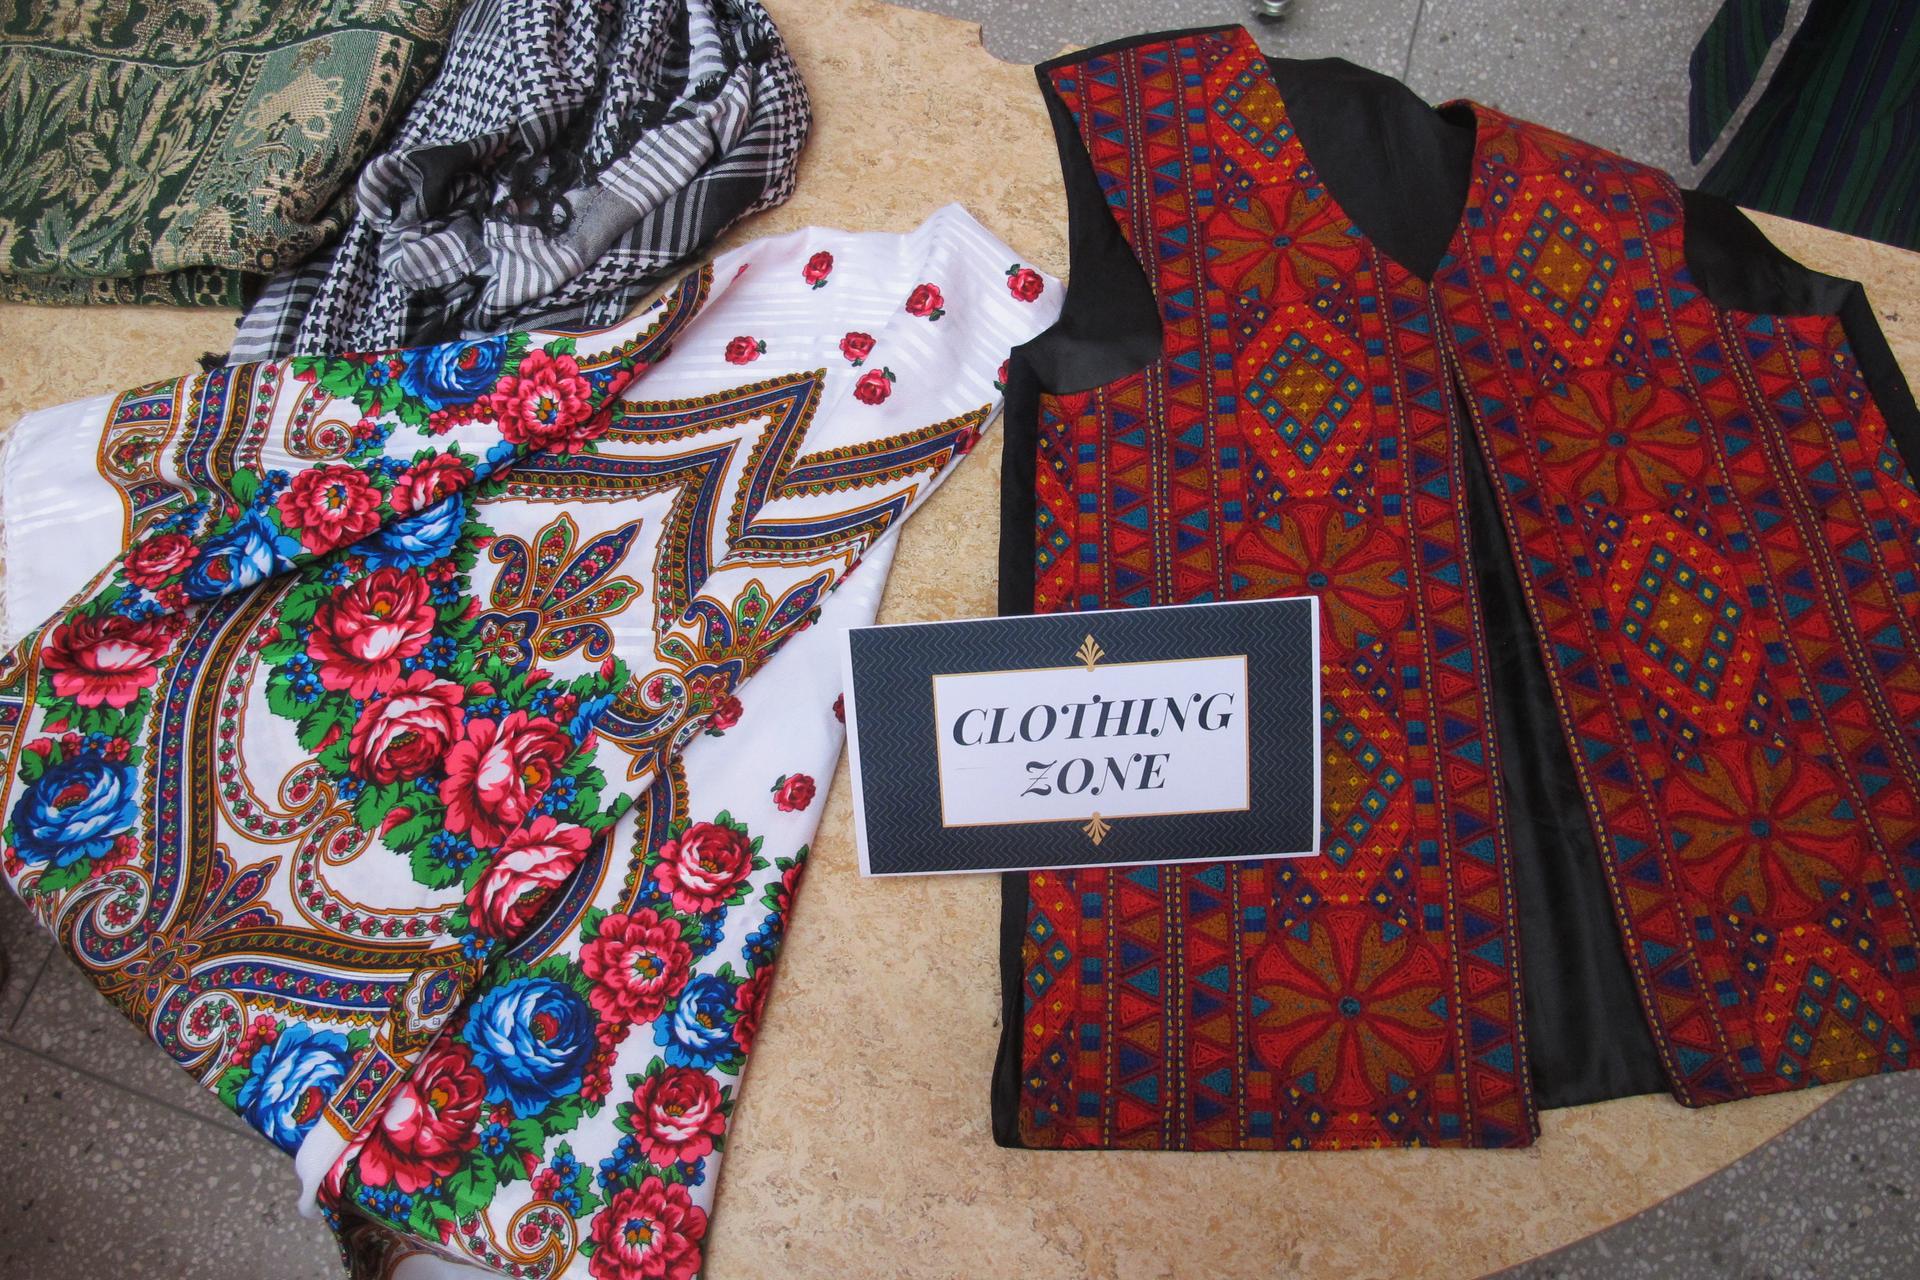 Traditional clothes on display at the Afghan Culture Day at the American University of Central Asia (AUCA) in Bishkek, Kyrgyzstan.